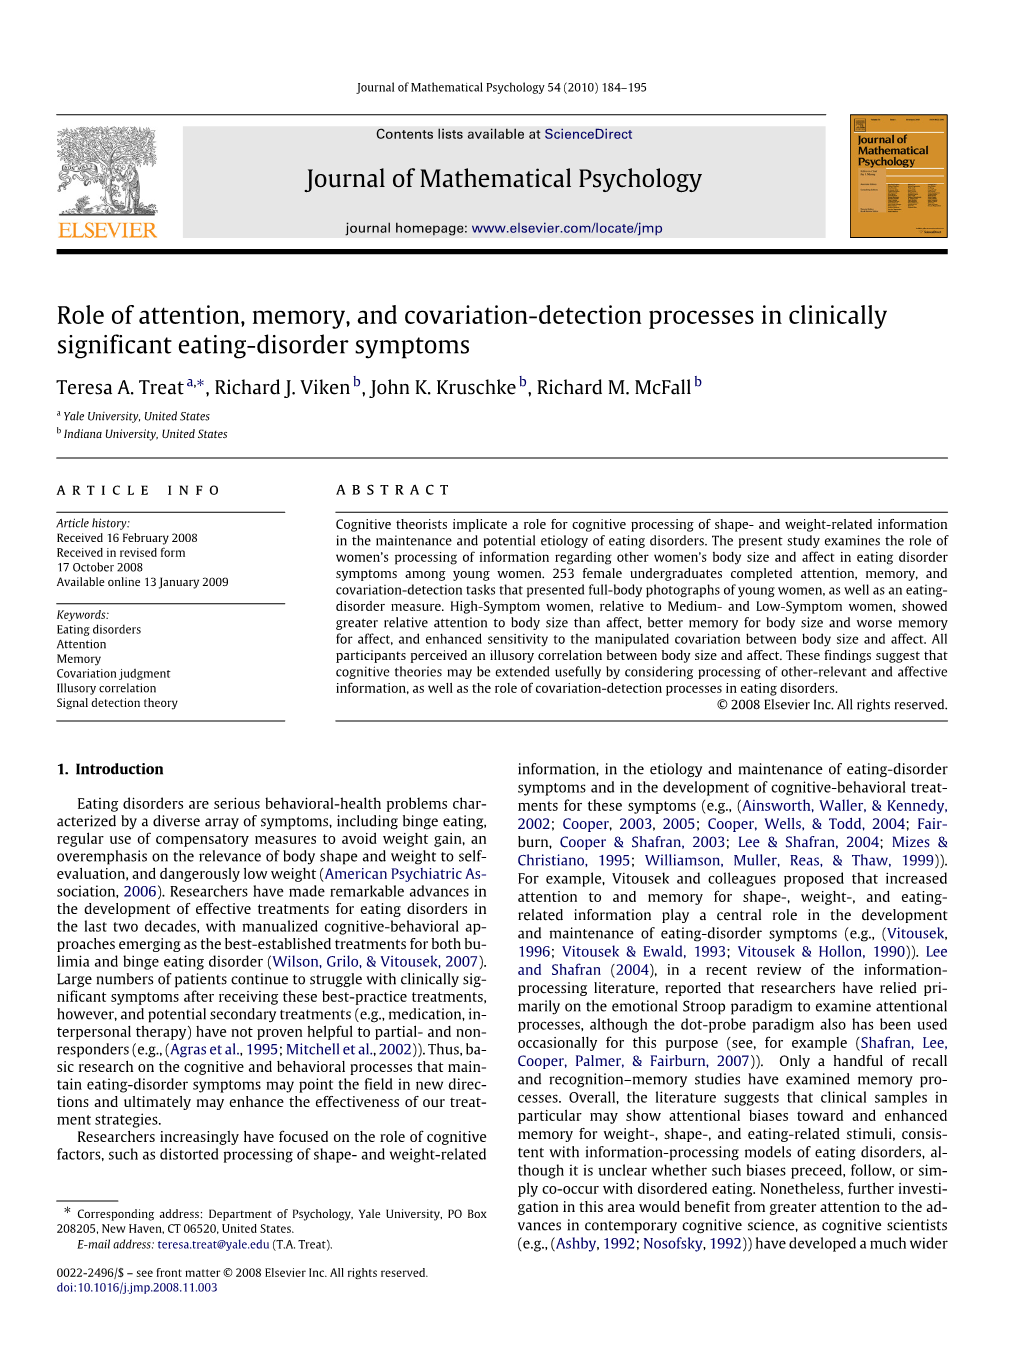 Role of Attention, Memory, and Covariation-Detection Processes in Clinically Significant Eating-Disorder Symptoms